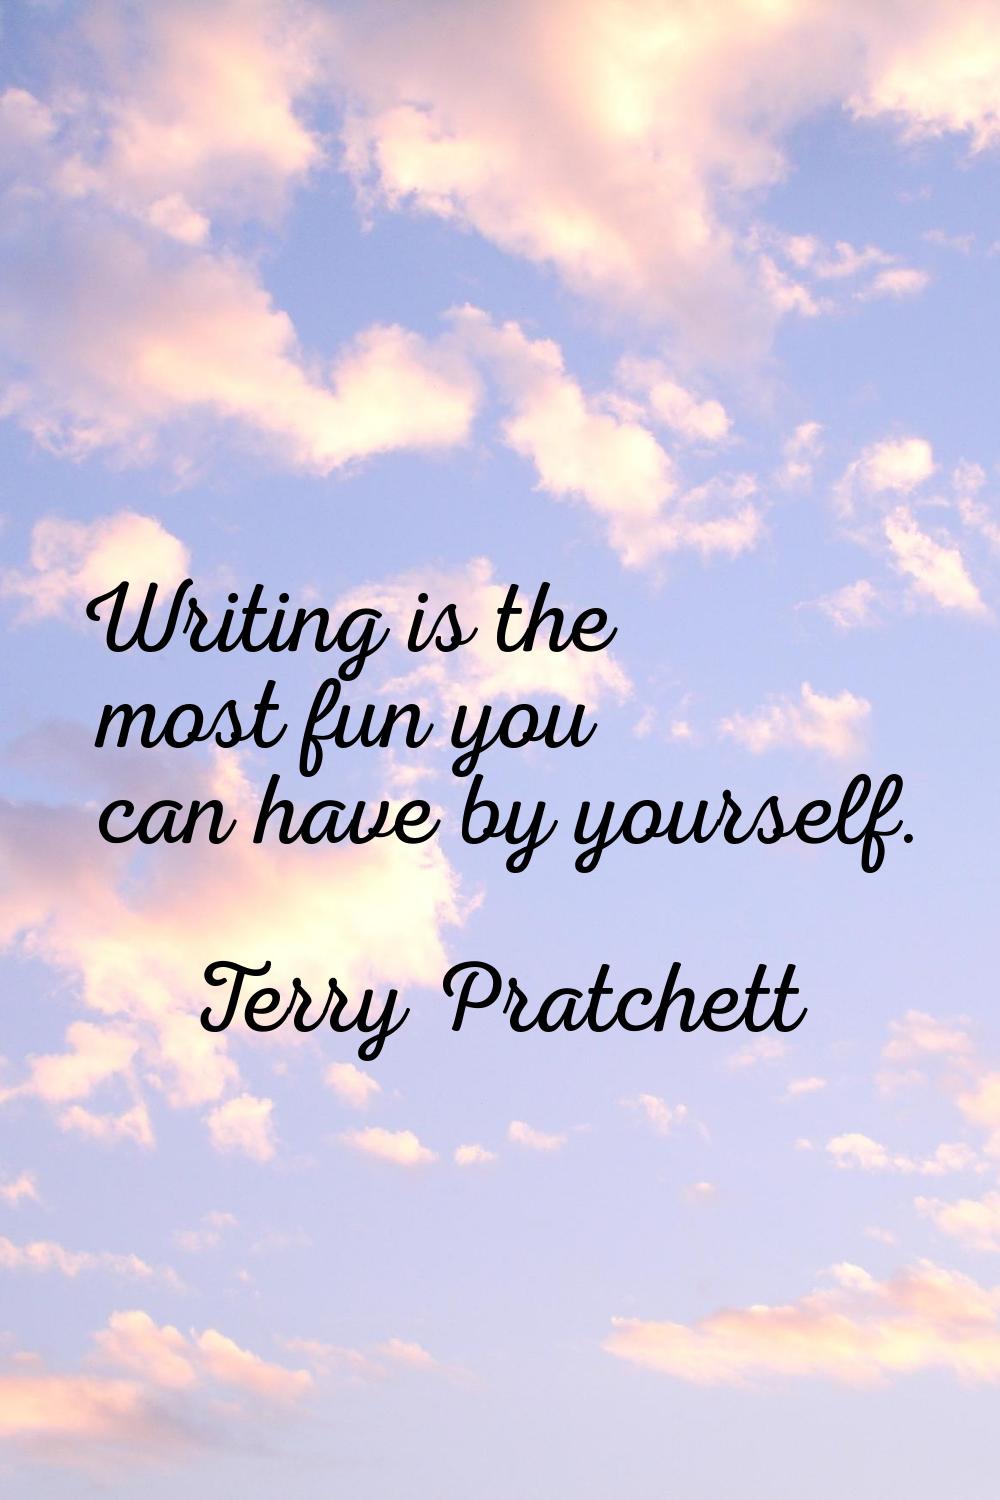 Writing is the most fun you can have by yourself.